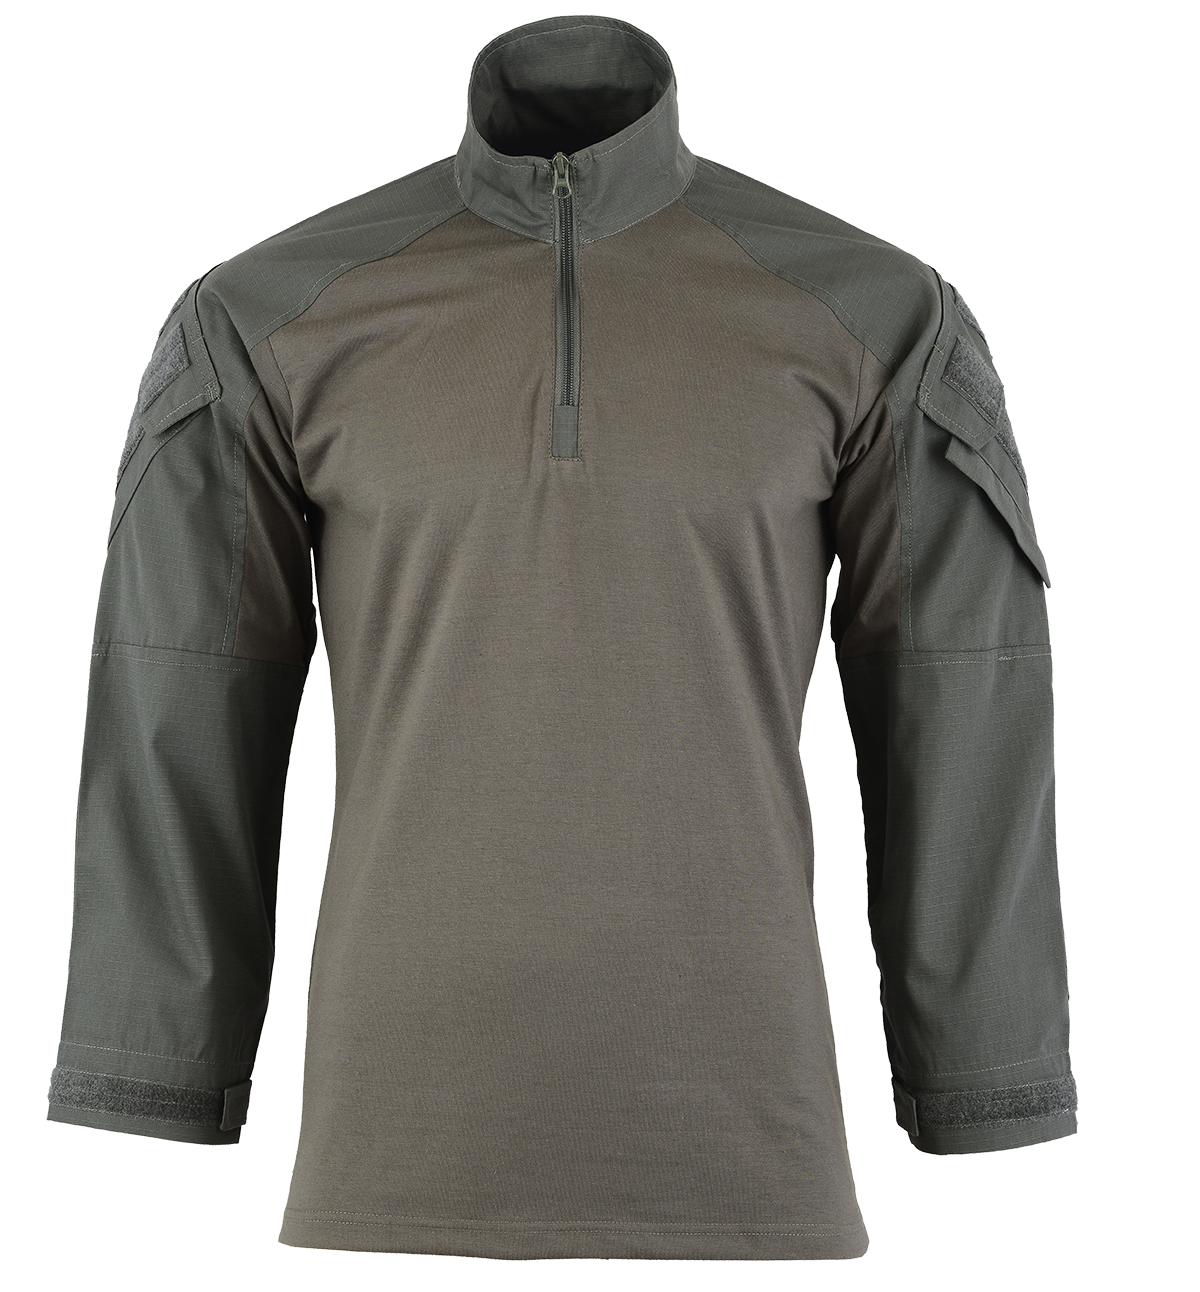 Tactical Zone HYBRID TACTICAL SHIRT IS A PERFECT COMBAT SHIRT Colour  Grey